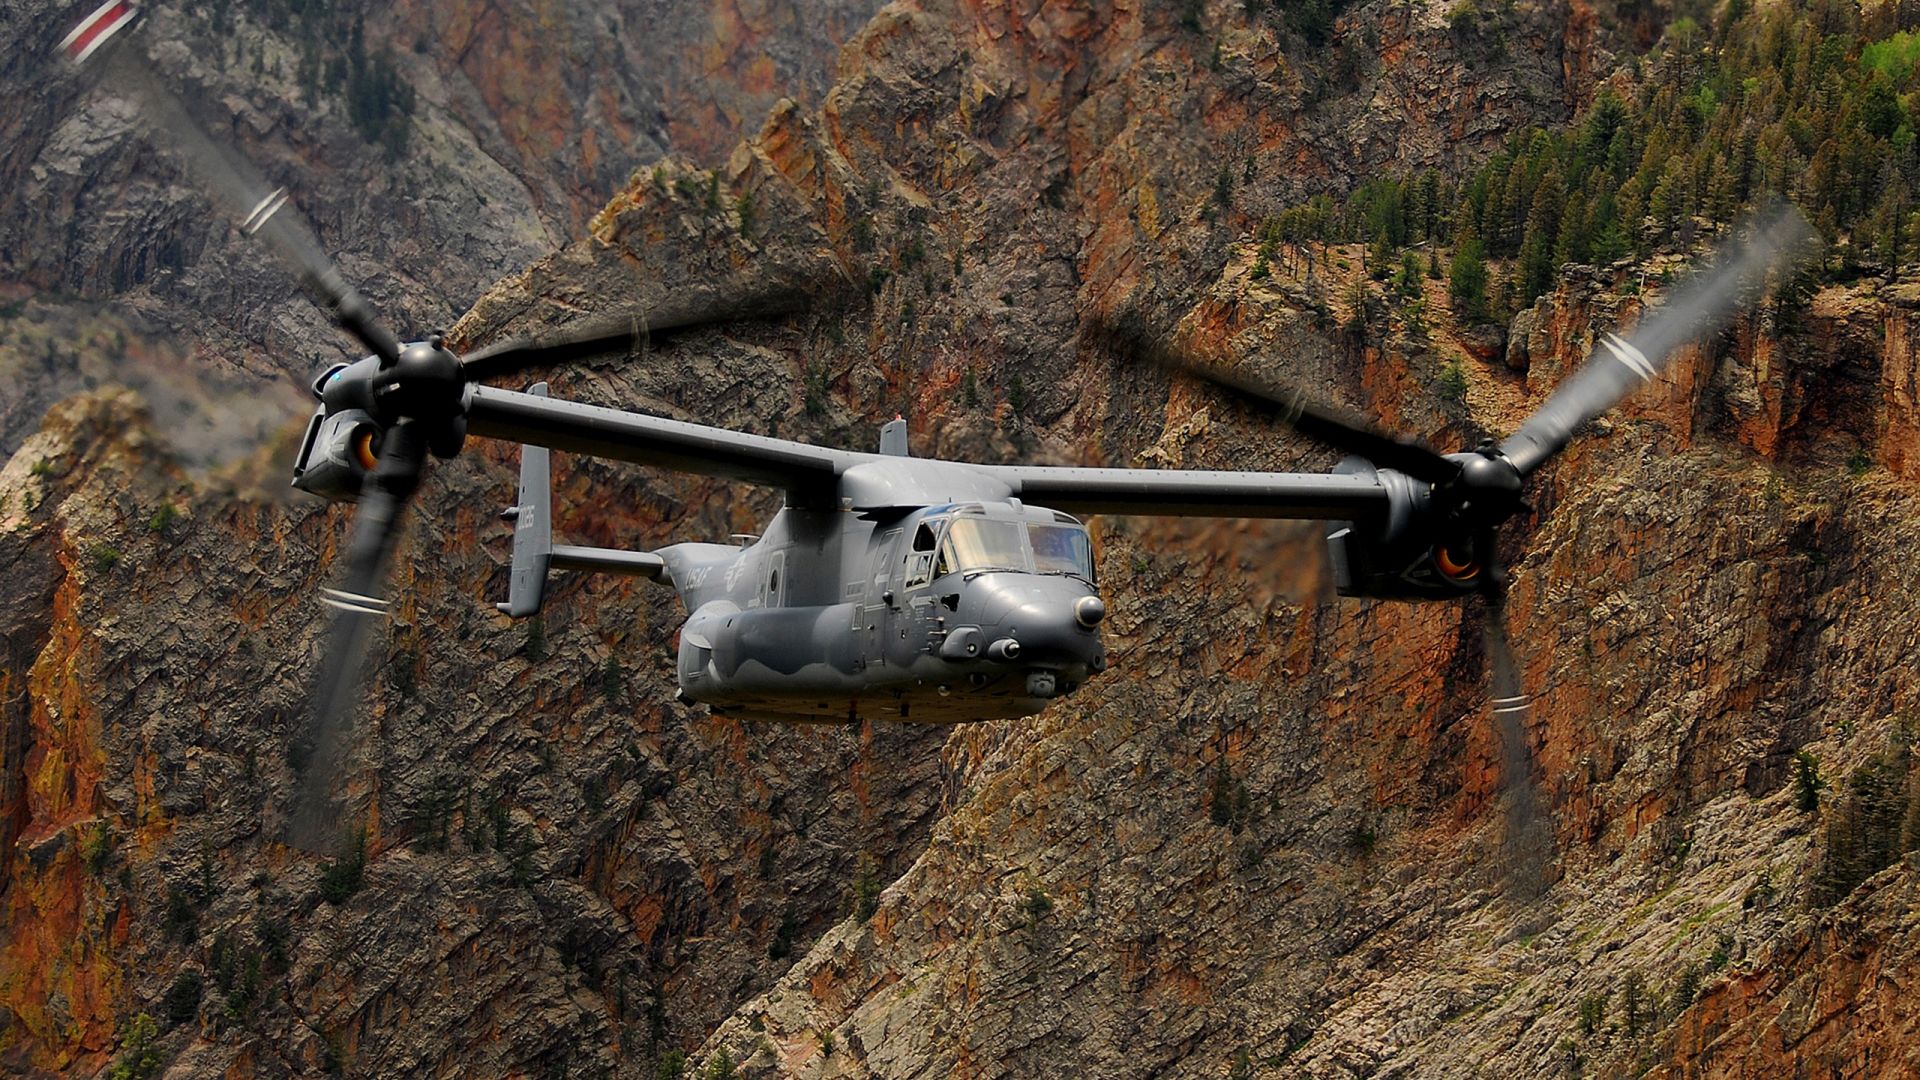 Military aircraft flying in the sky - Bell Boeing V-22 Osprey.